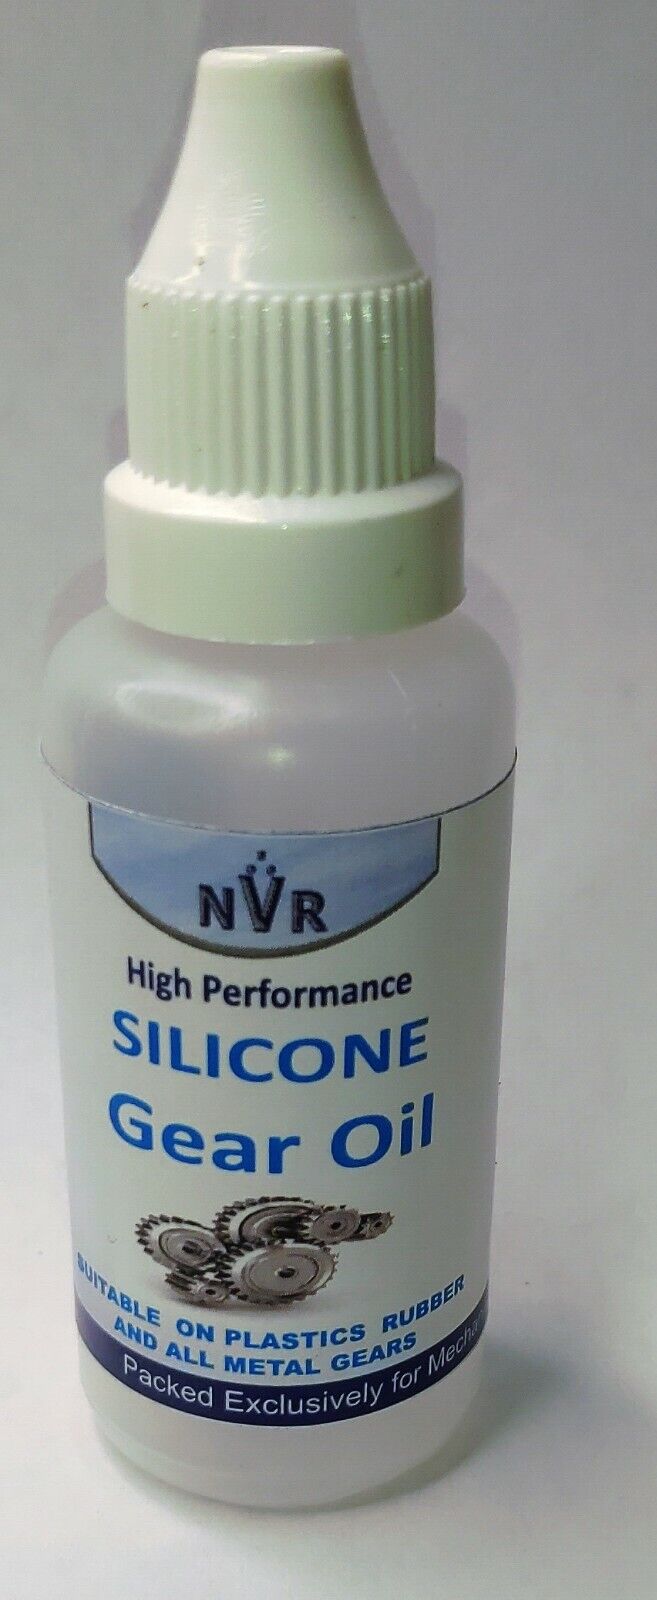 Silicone Gear Oil Dielectric Lubrication export quality 30ml